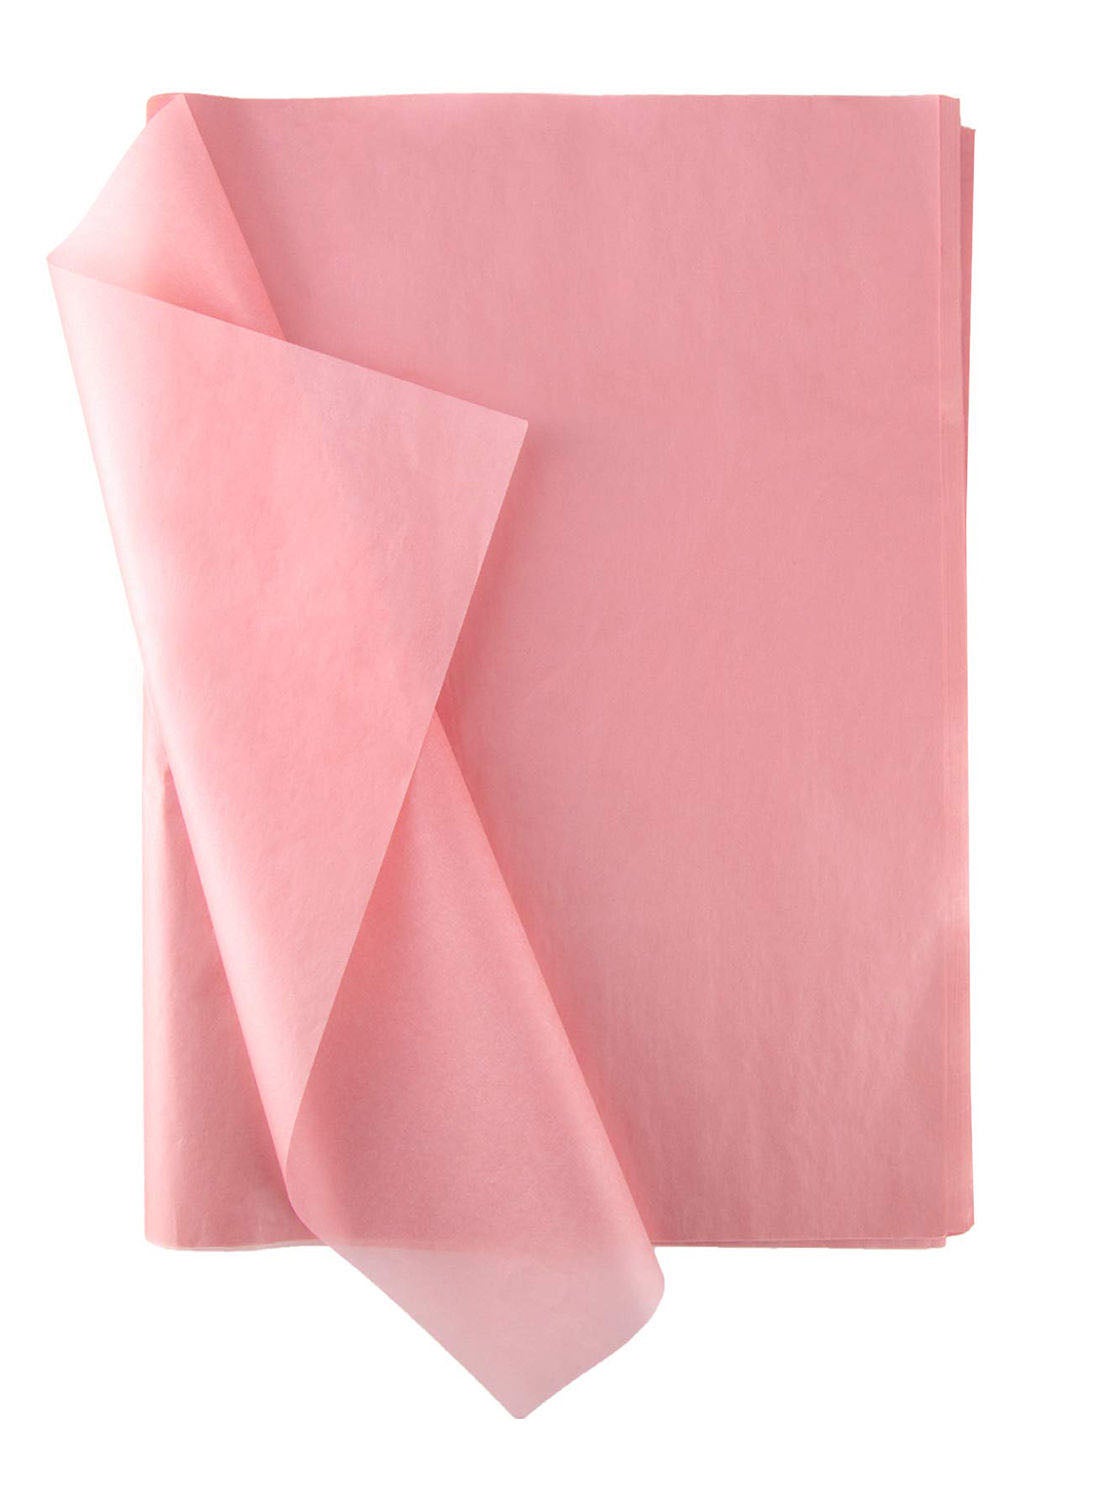 50-Pieces Premium Quality Gift Wrapping Tissue Paper Pink